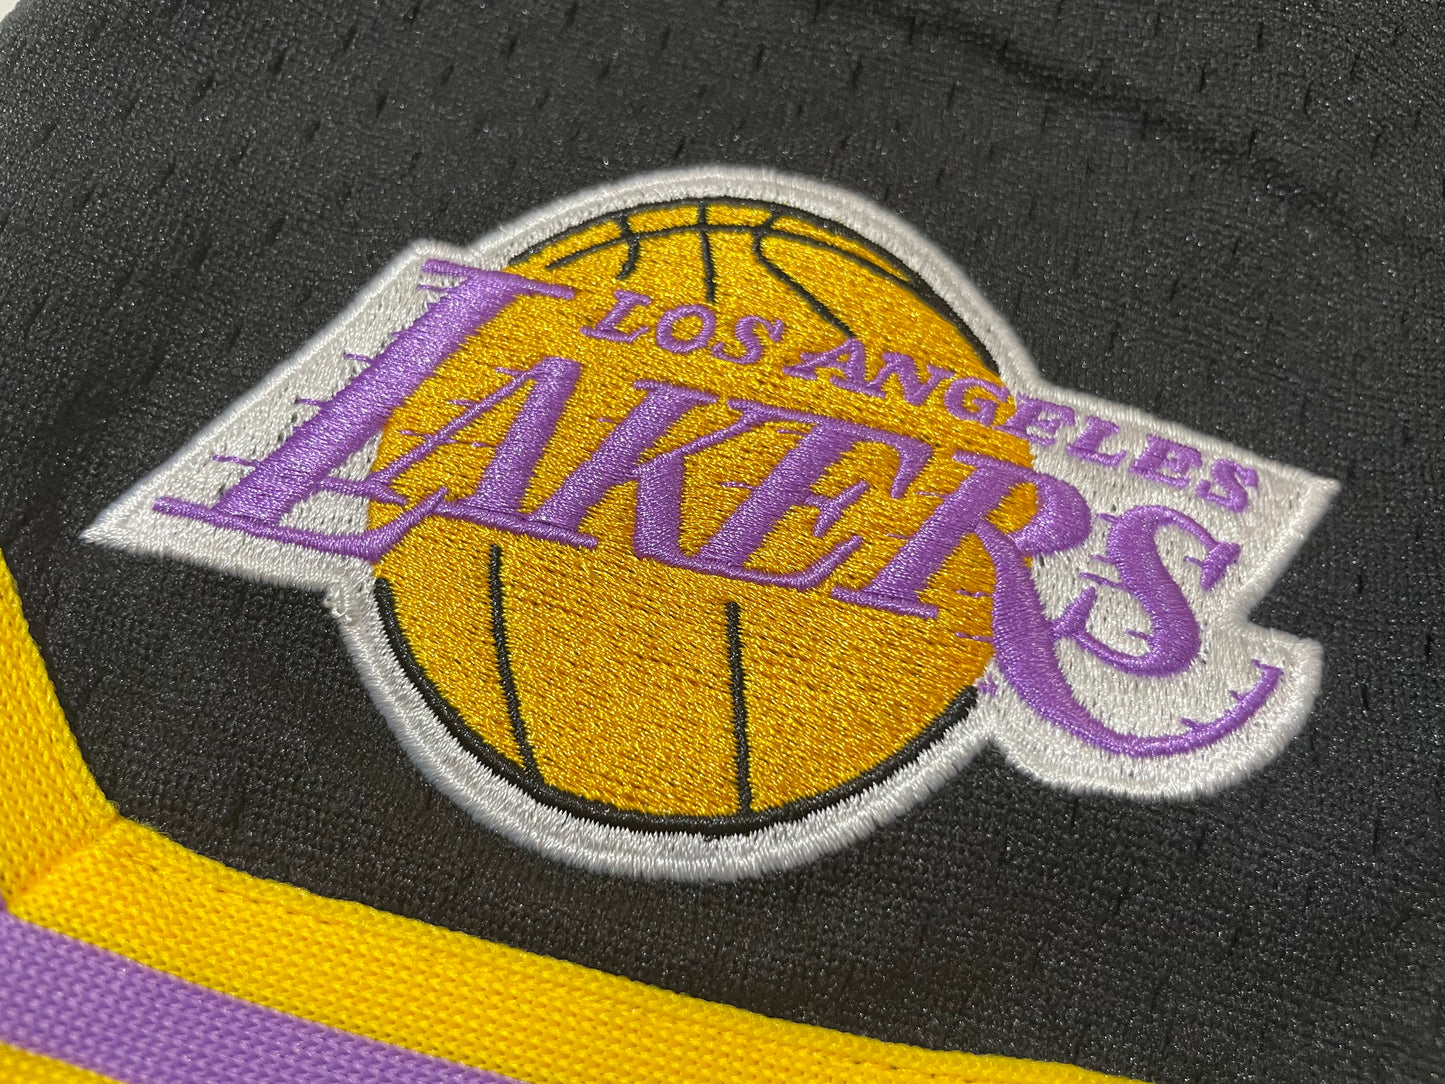 NBA JUST DON PRACTICE SHORTS LAKERS